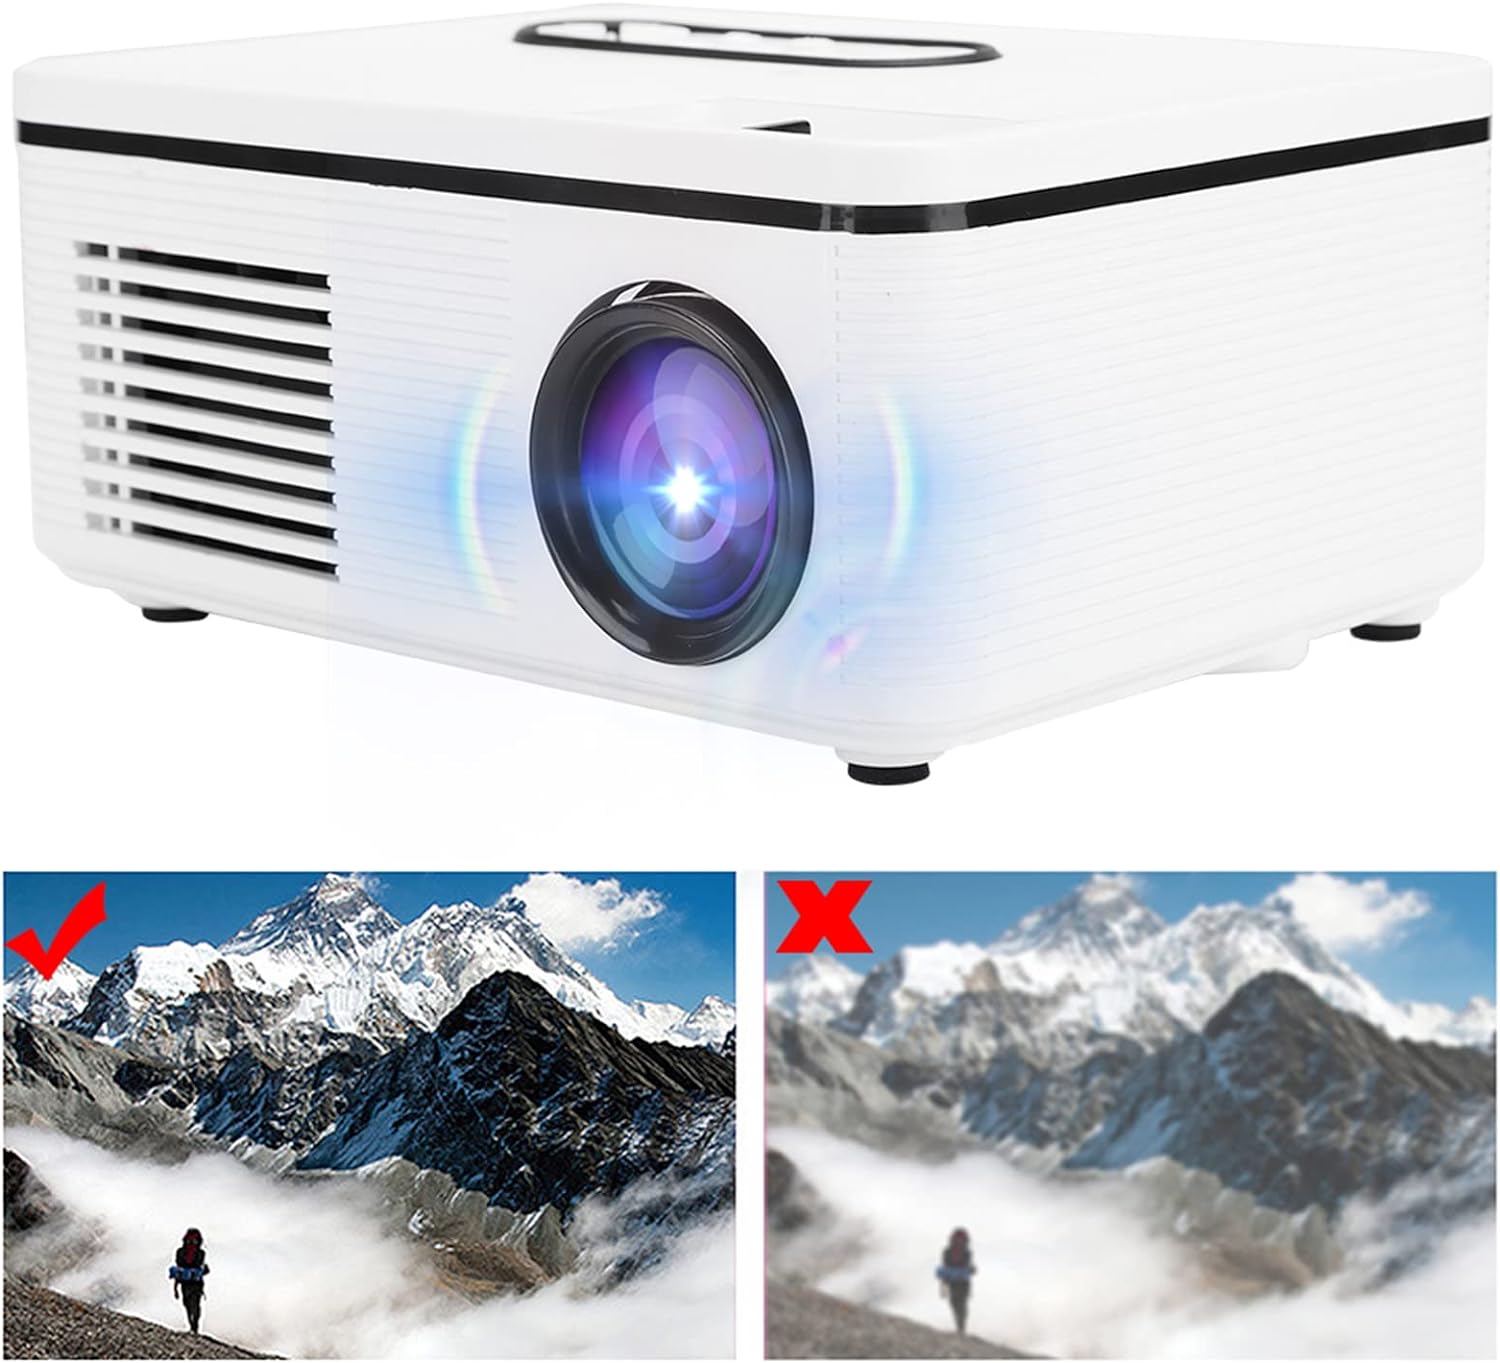 CiCiglow Mini Projector, Portable Video-Projector,Multimedia Home Theater Movie Projector,Video Projector 1080P Compatible with Desktop